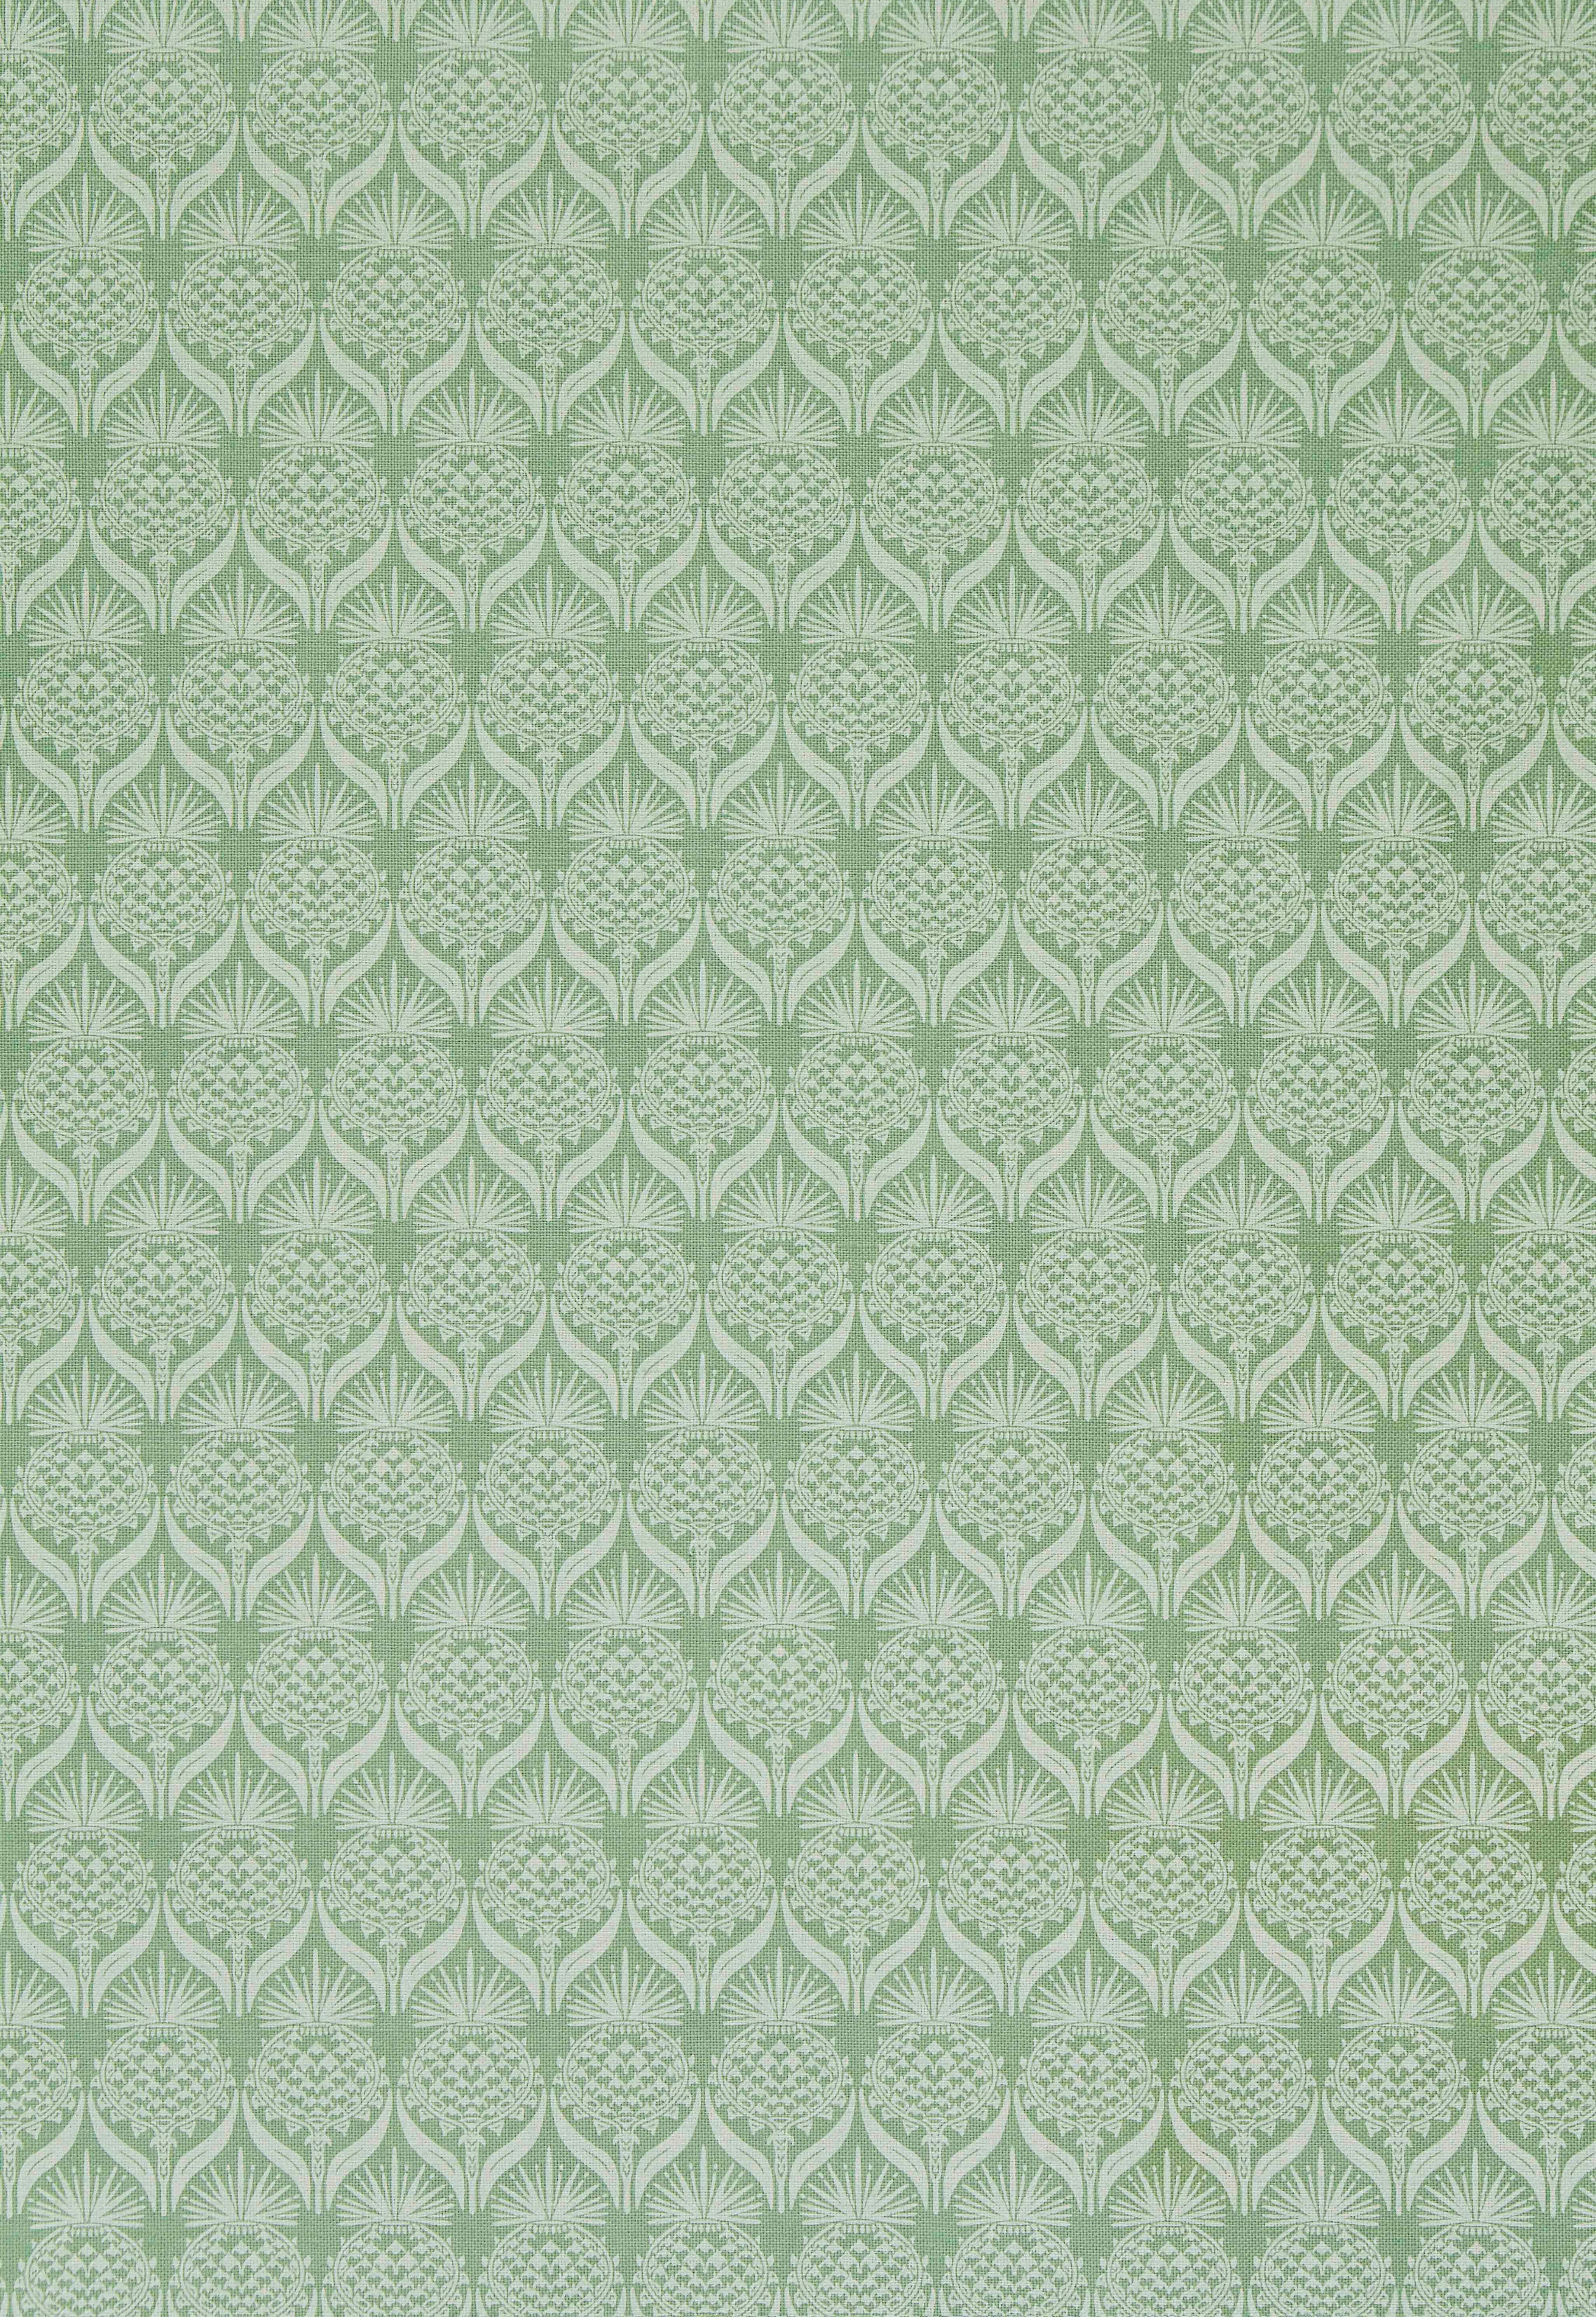 Color: Spring Green (also available in Teal and Gold)
Trim width: 142cm / 55.90 inches
Pattern repeat: Straight Match
Match length: 45.7cm / 18 inches
Composition: 58% linen 42% cotton
Usage: General domestic upholstery

Sold per